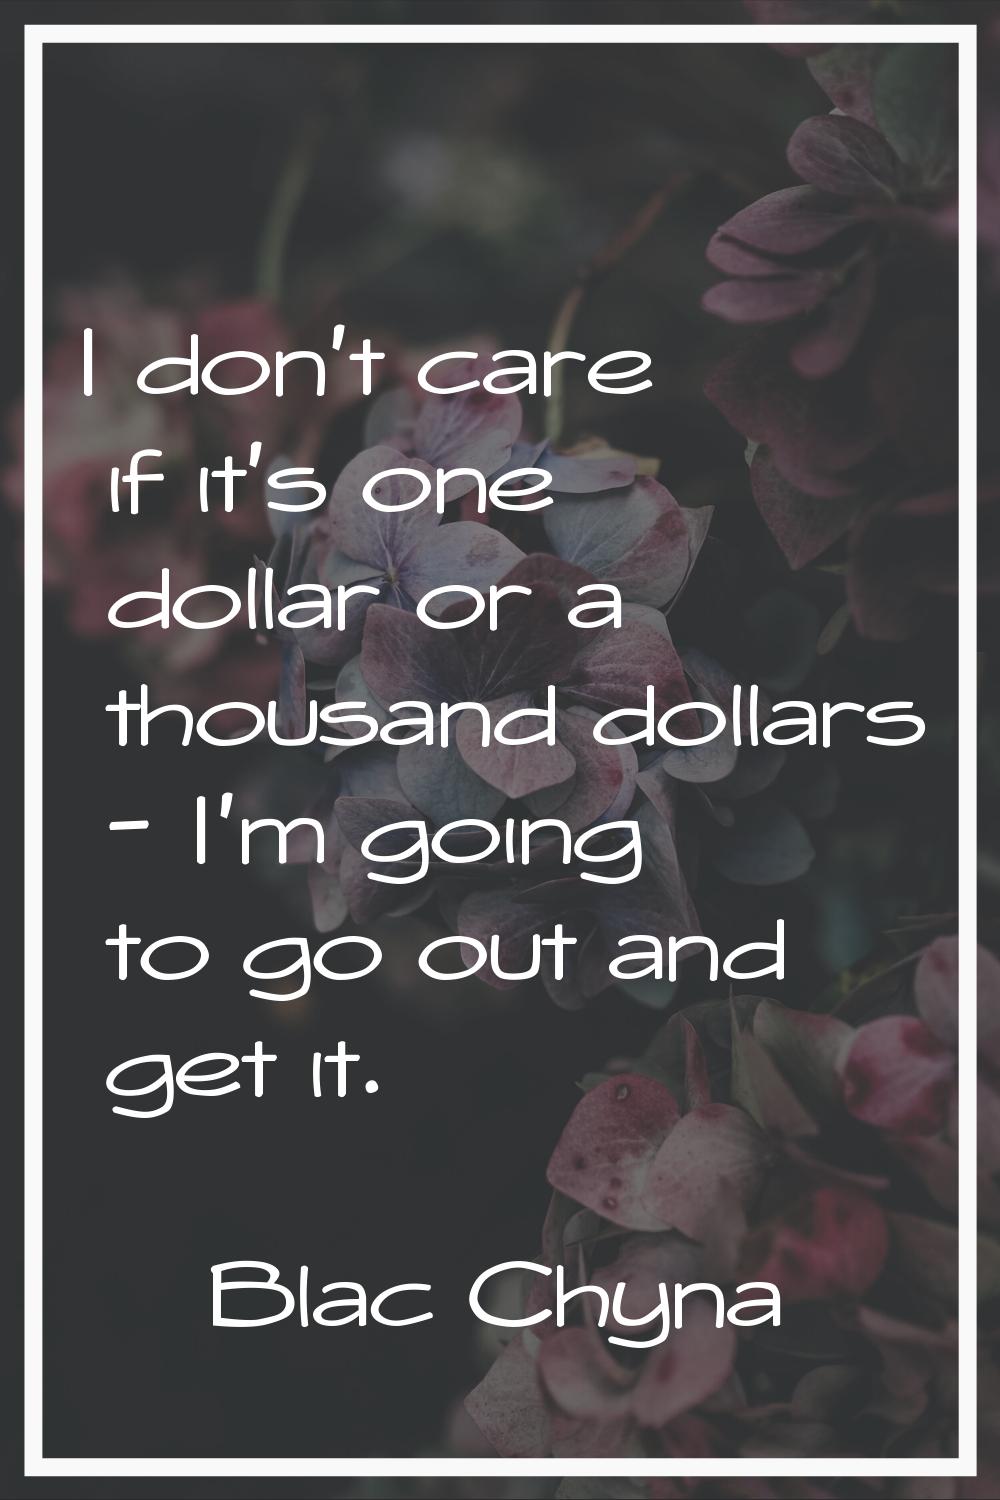 I don't care if it's one dollar or a thousand dollars - I'm going to go out and get it.